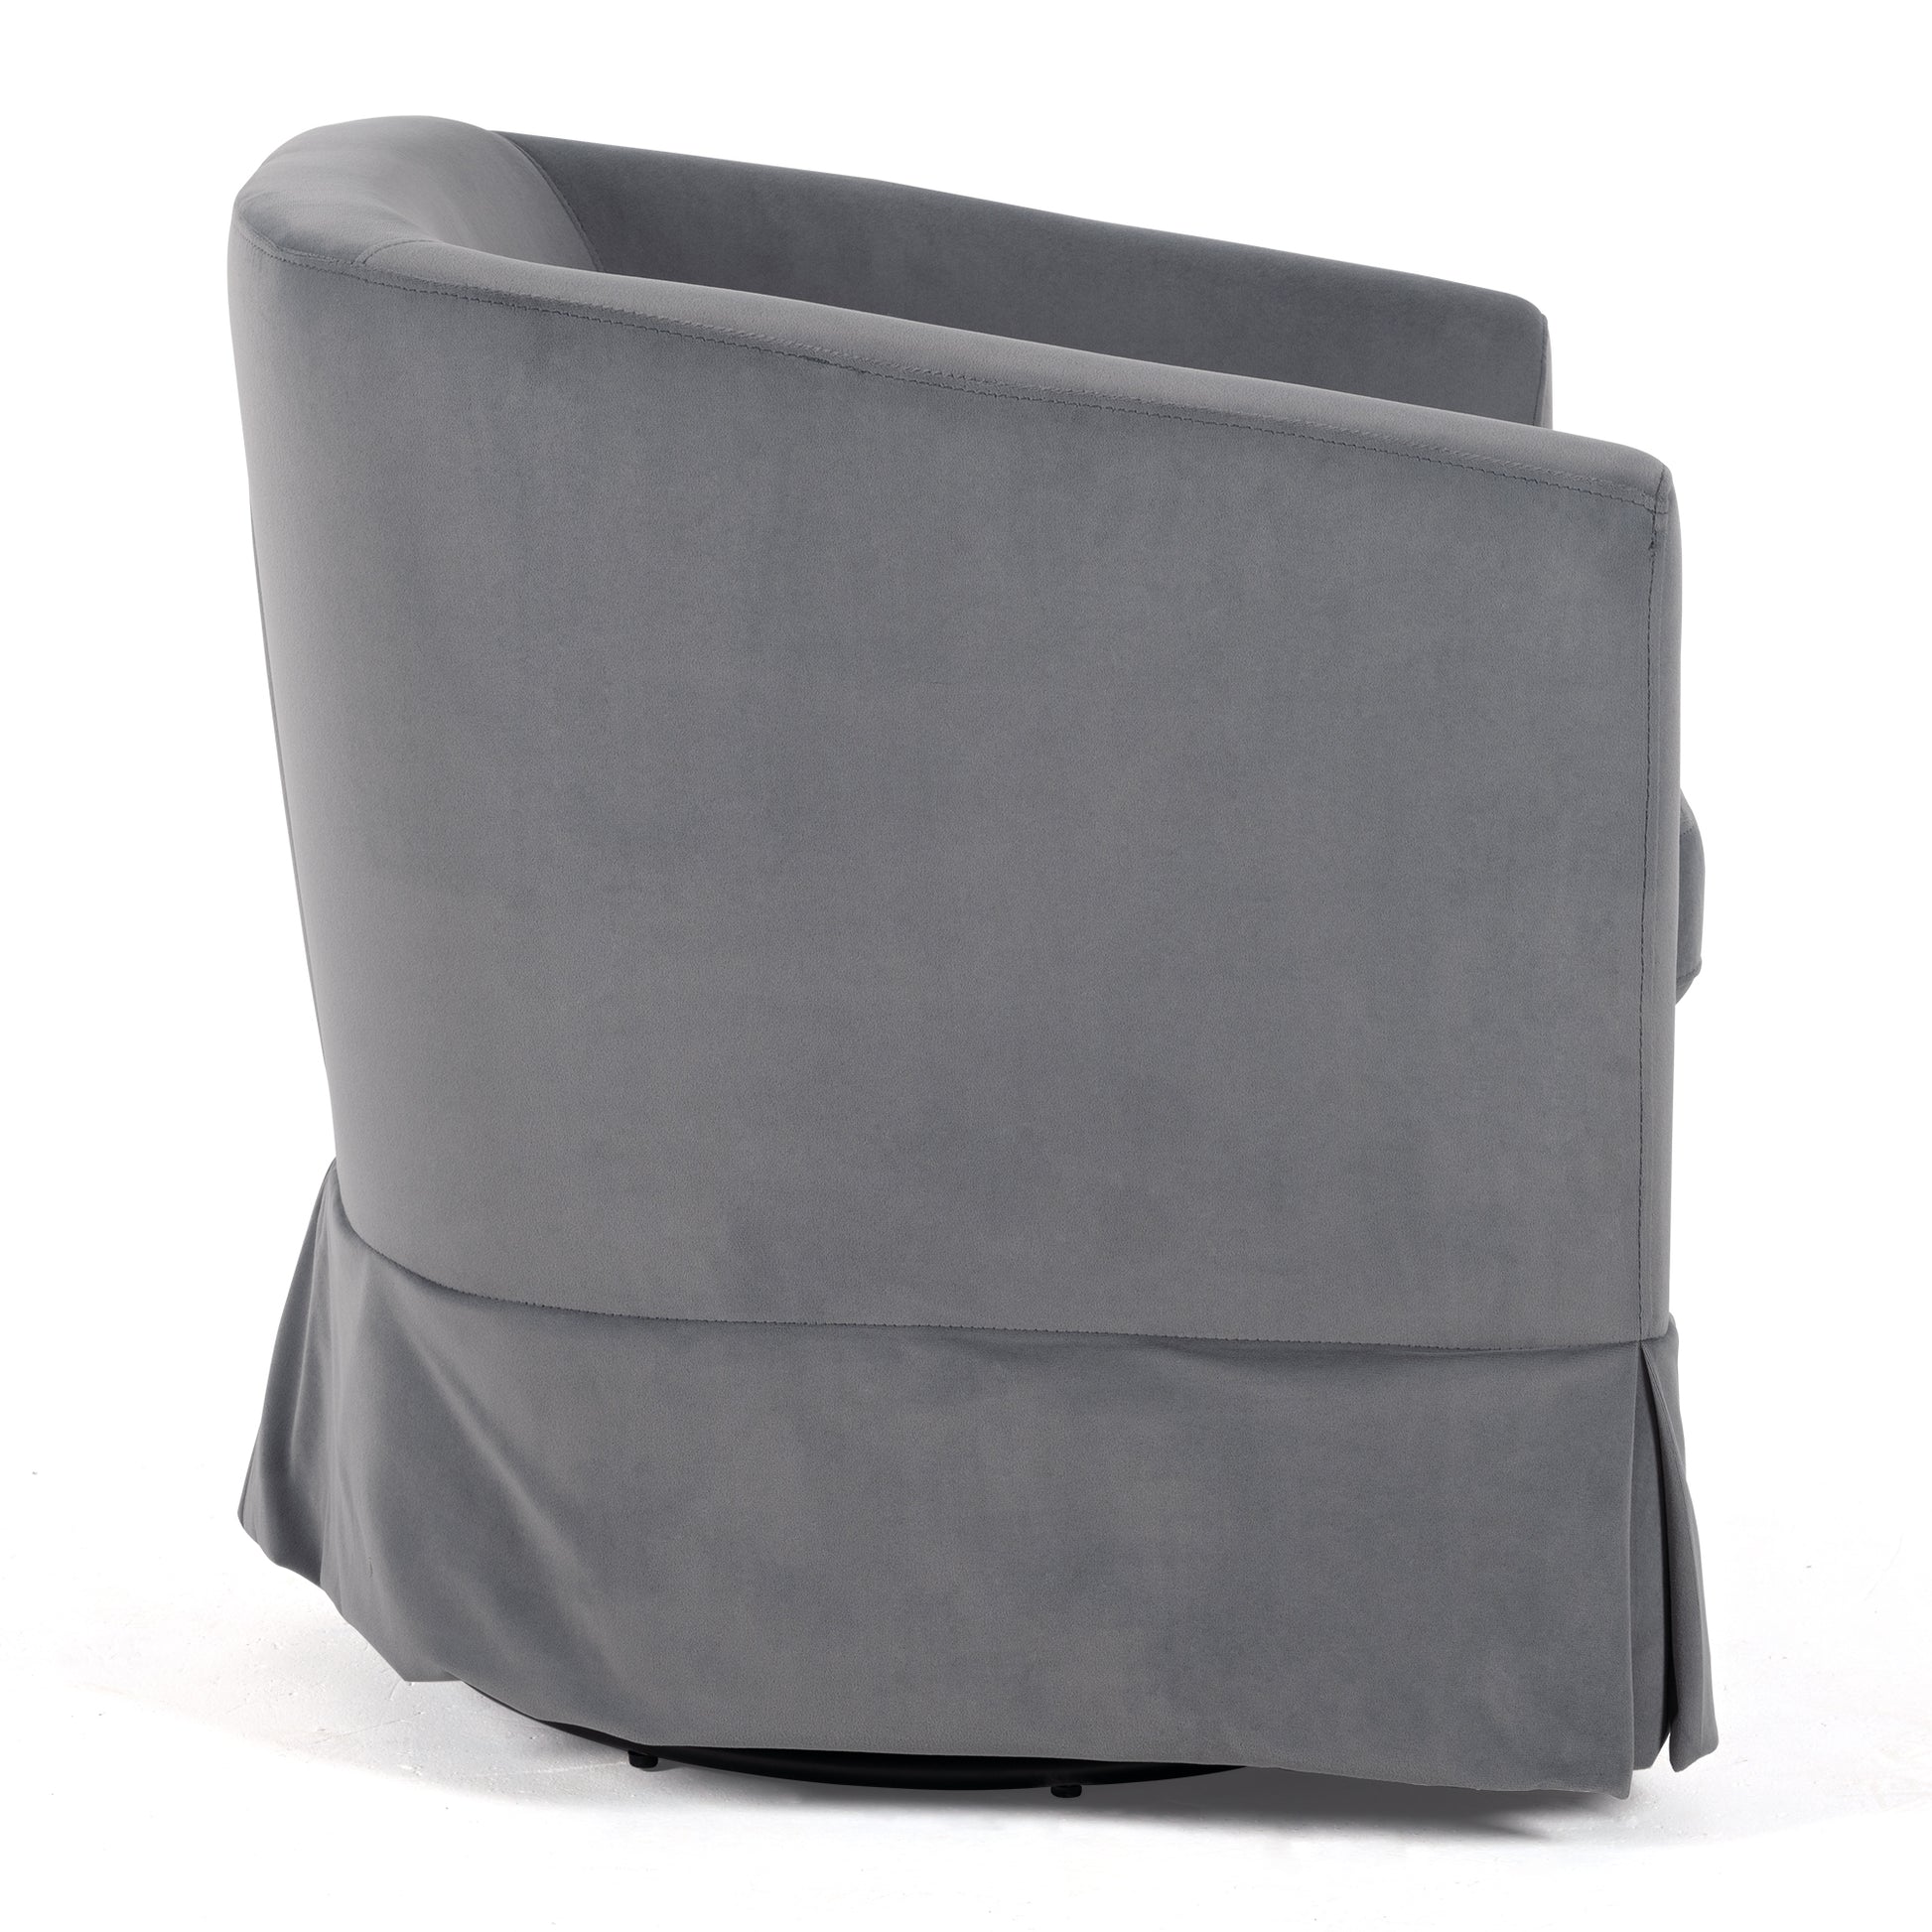 27.36" Wide Swivel Chair - Gray Polyester